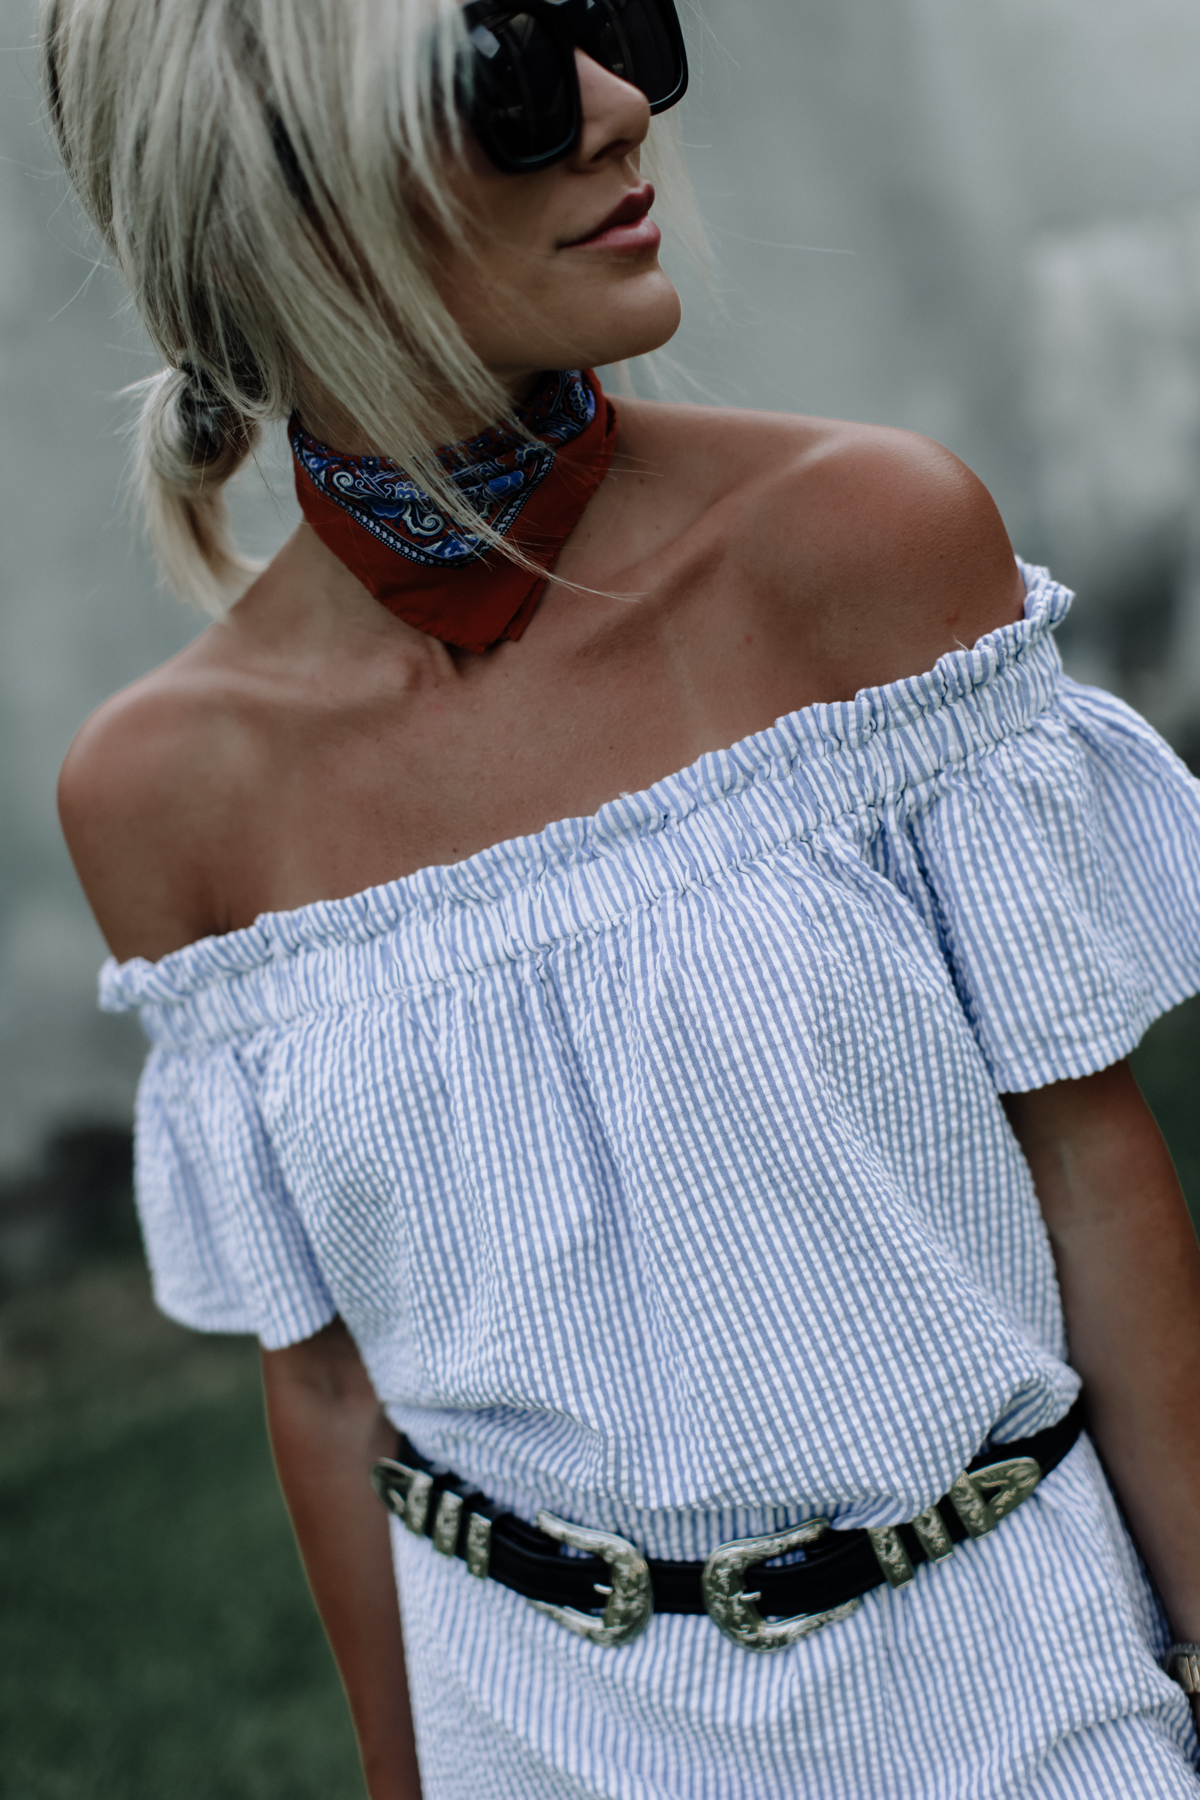 western double buckle belt with blue/white striped dress